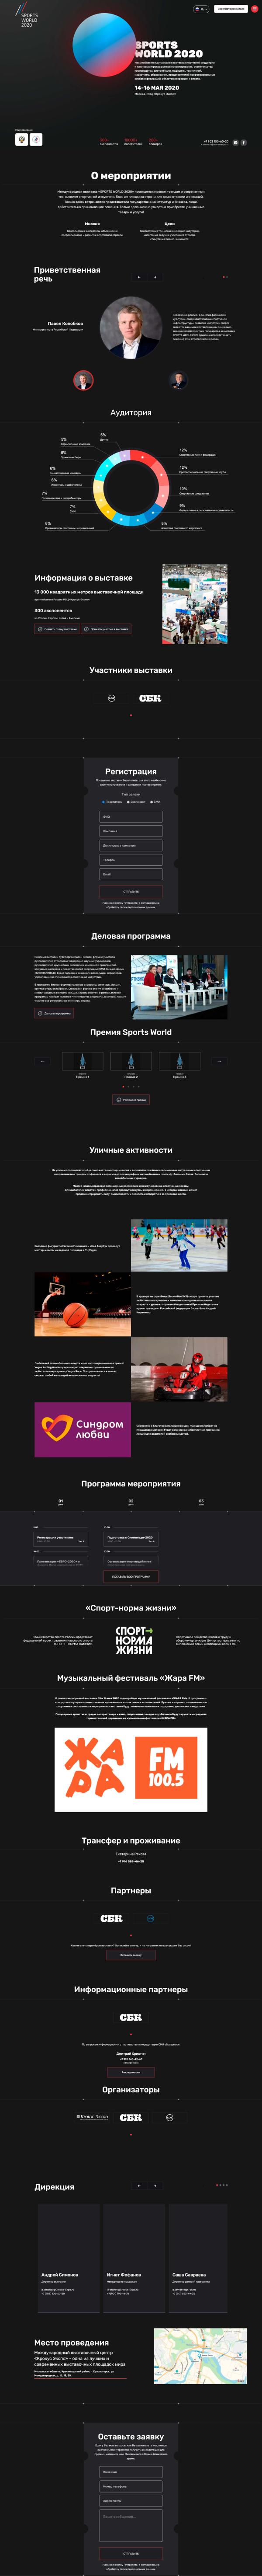 Desktop version of Exhibition and conference Sports World 2020